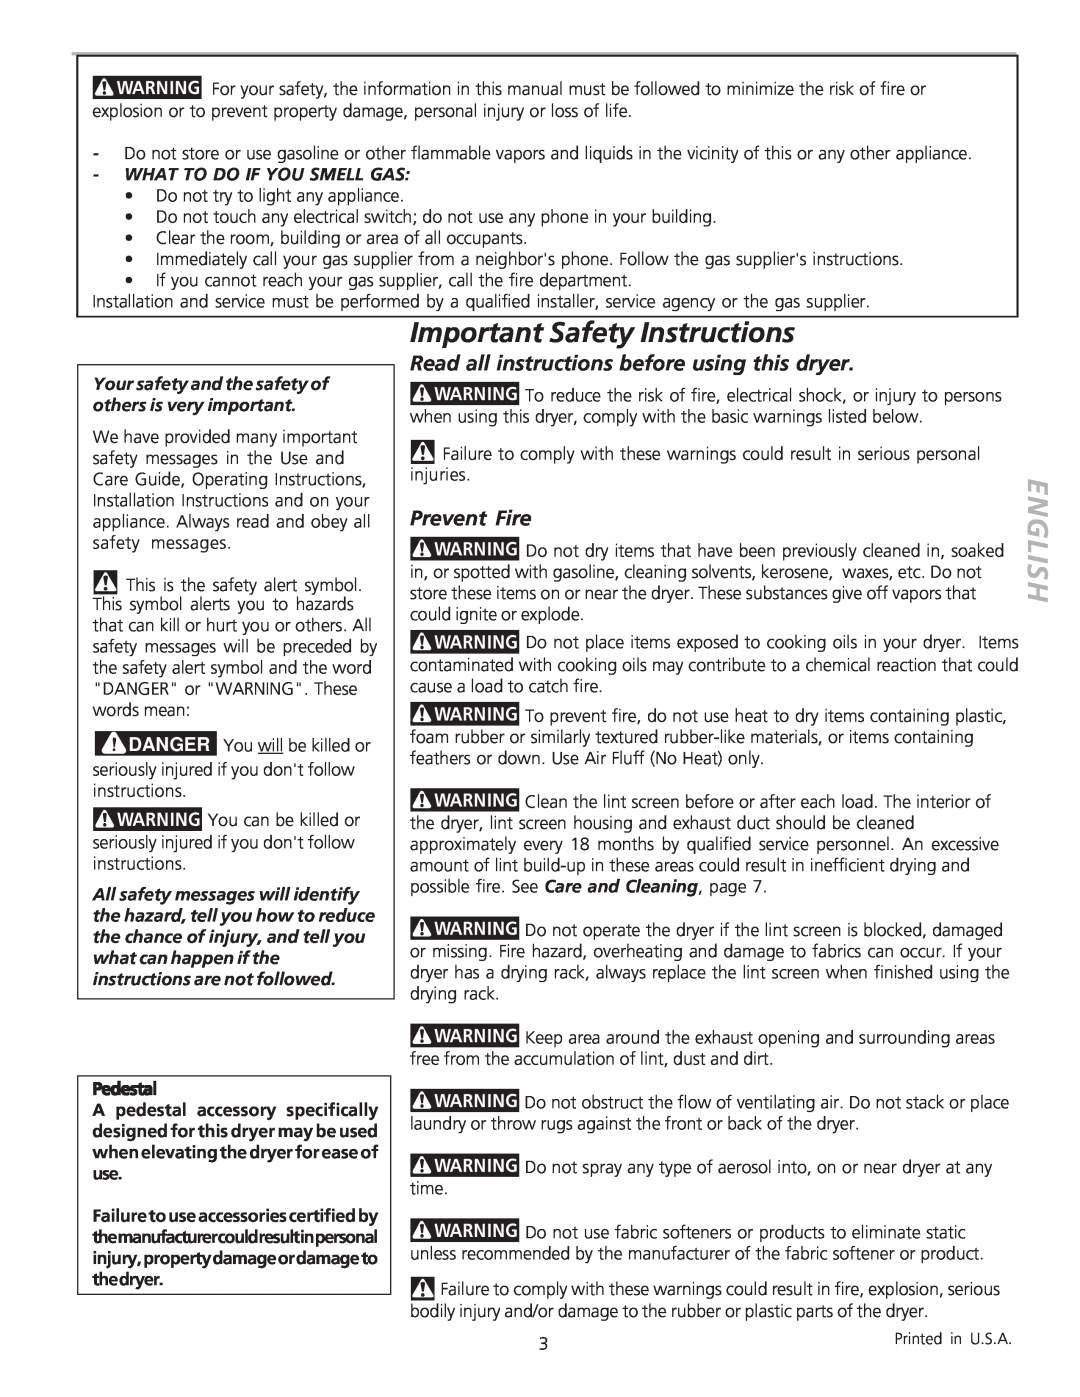 Frigidaire 134306300A Important Safety Instructions, Read all instructions before using this dryer, Prevent Fire, Pedestal 